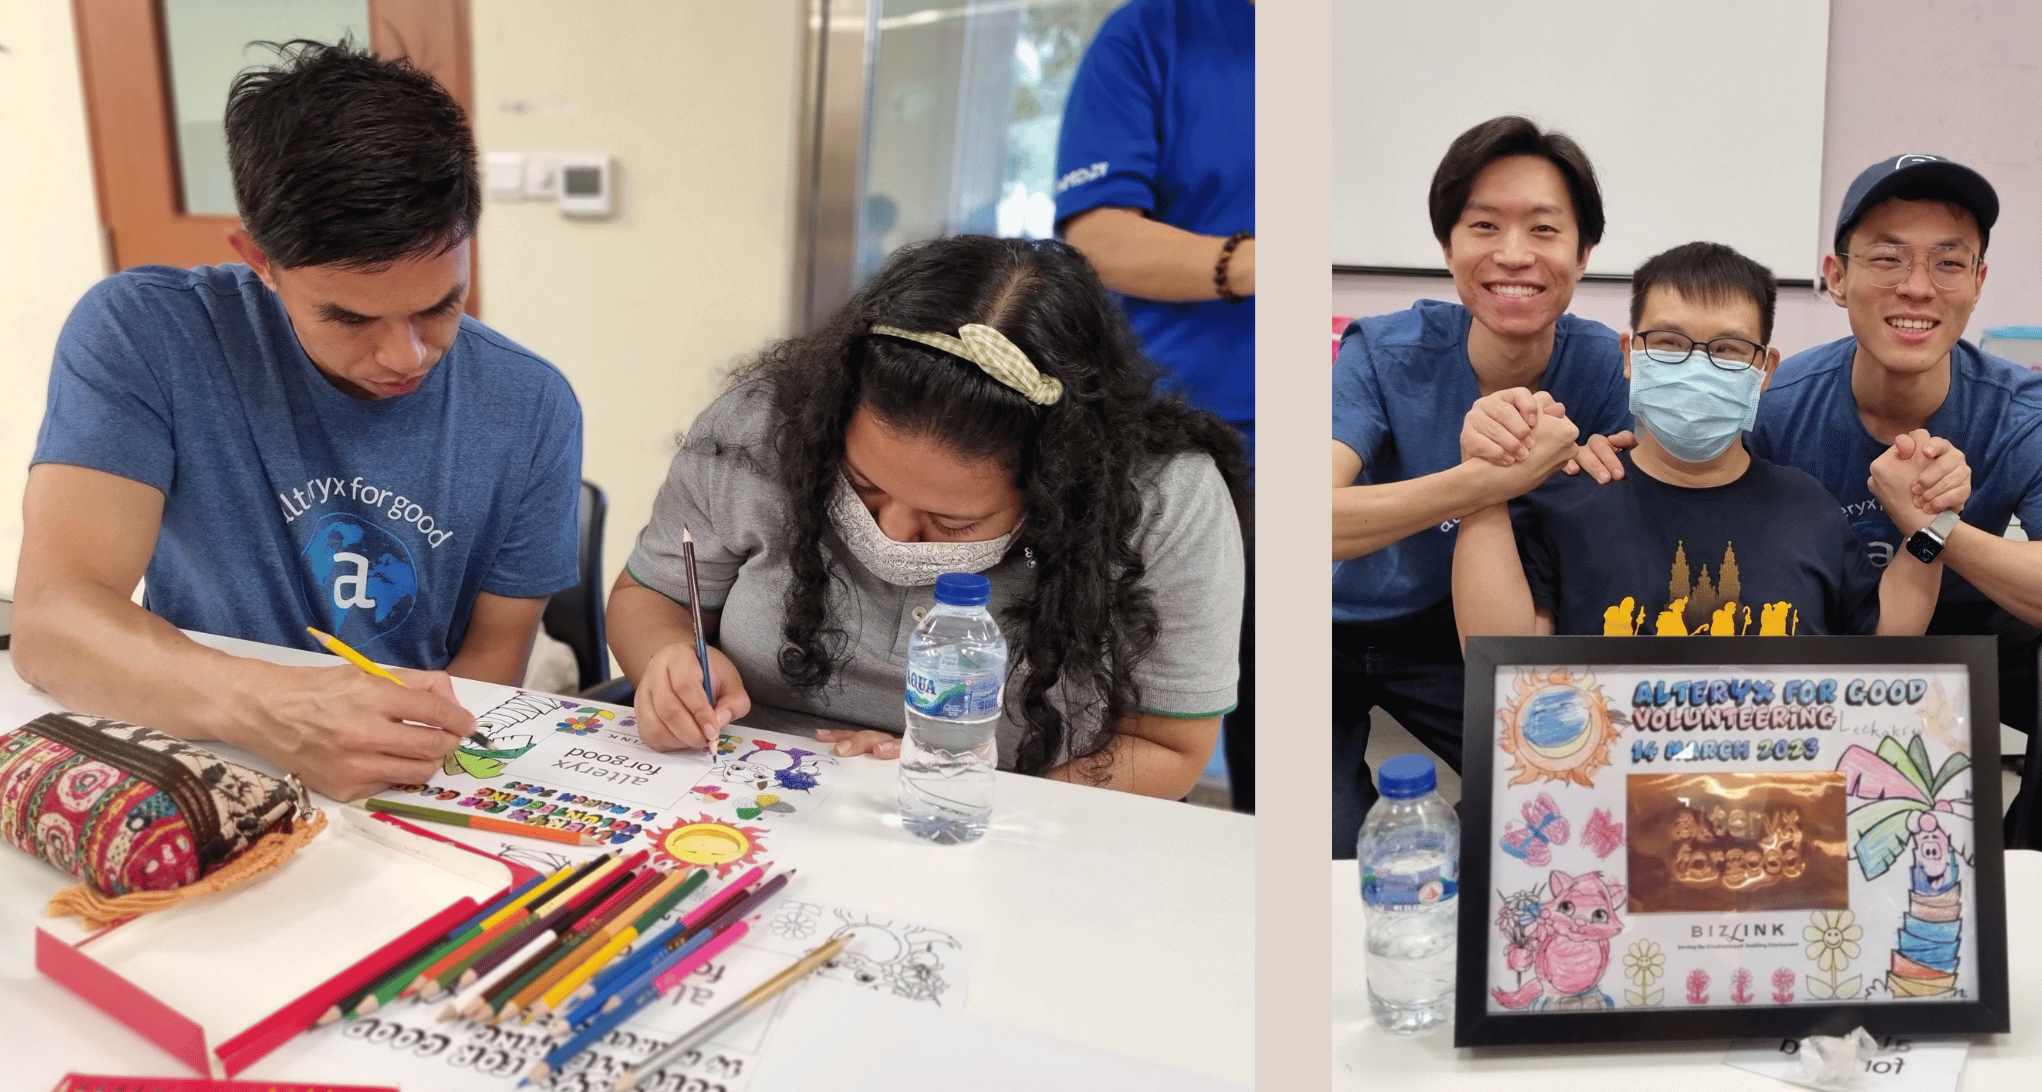 Alteryx staff doing coloring with a beneficiary and a beneficiary posing with 2 alteryx staff together with their copper tooling artwork